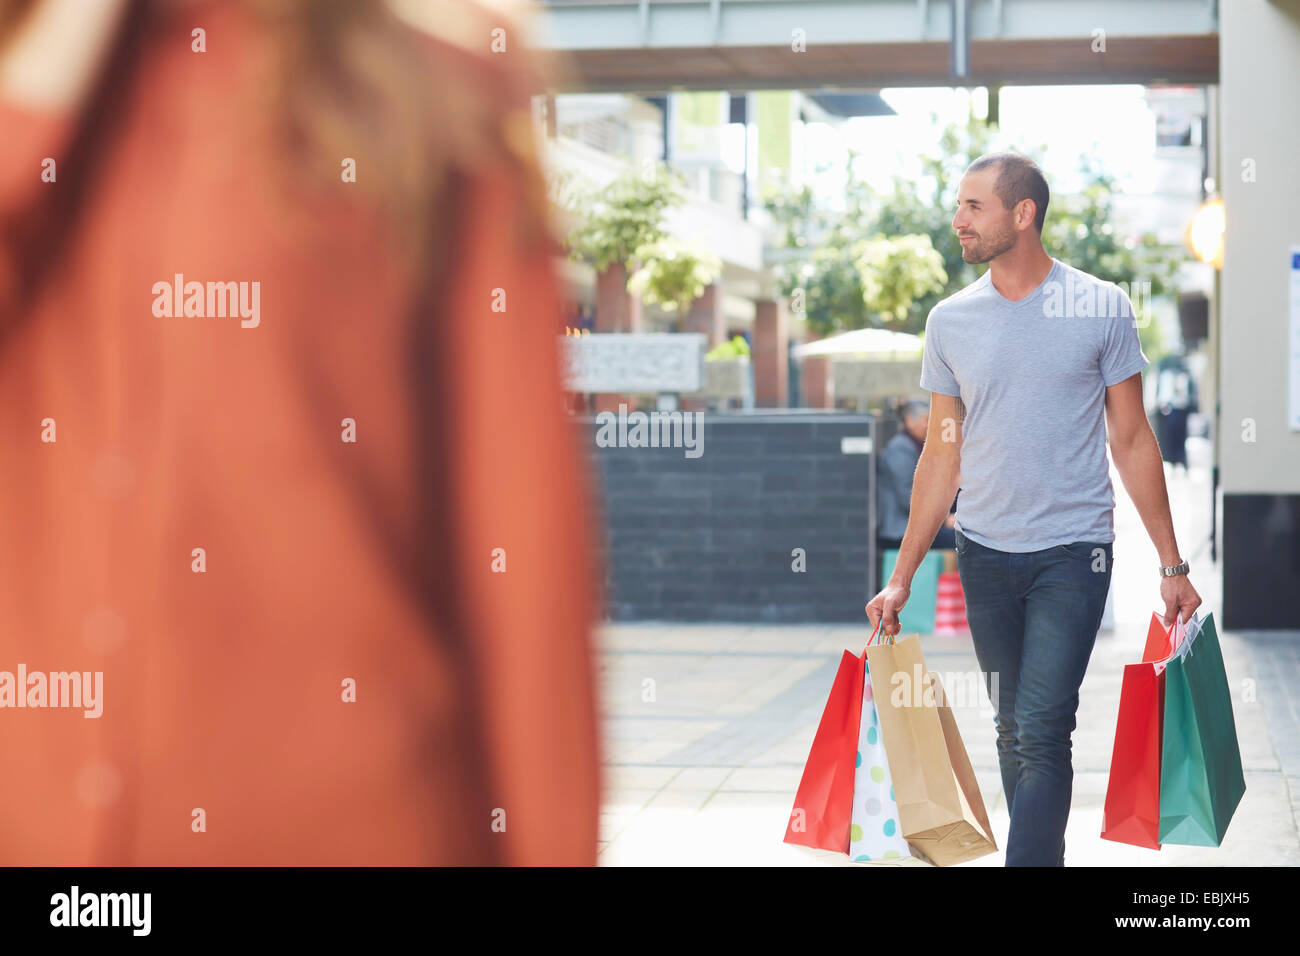 Mid adult man holding shopping bags, walking behind woman Stock Photo